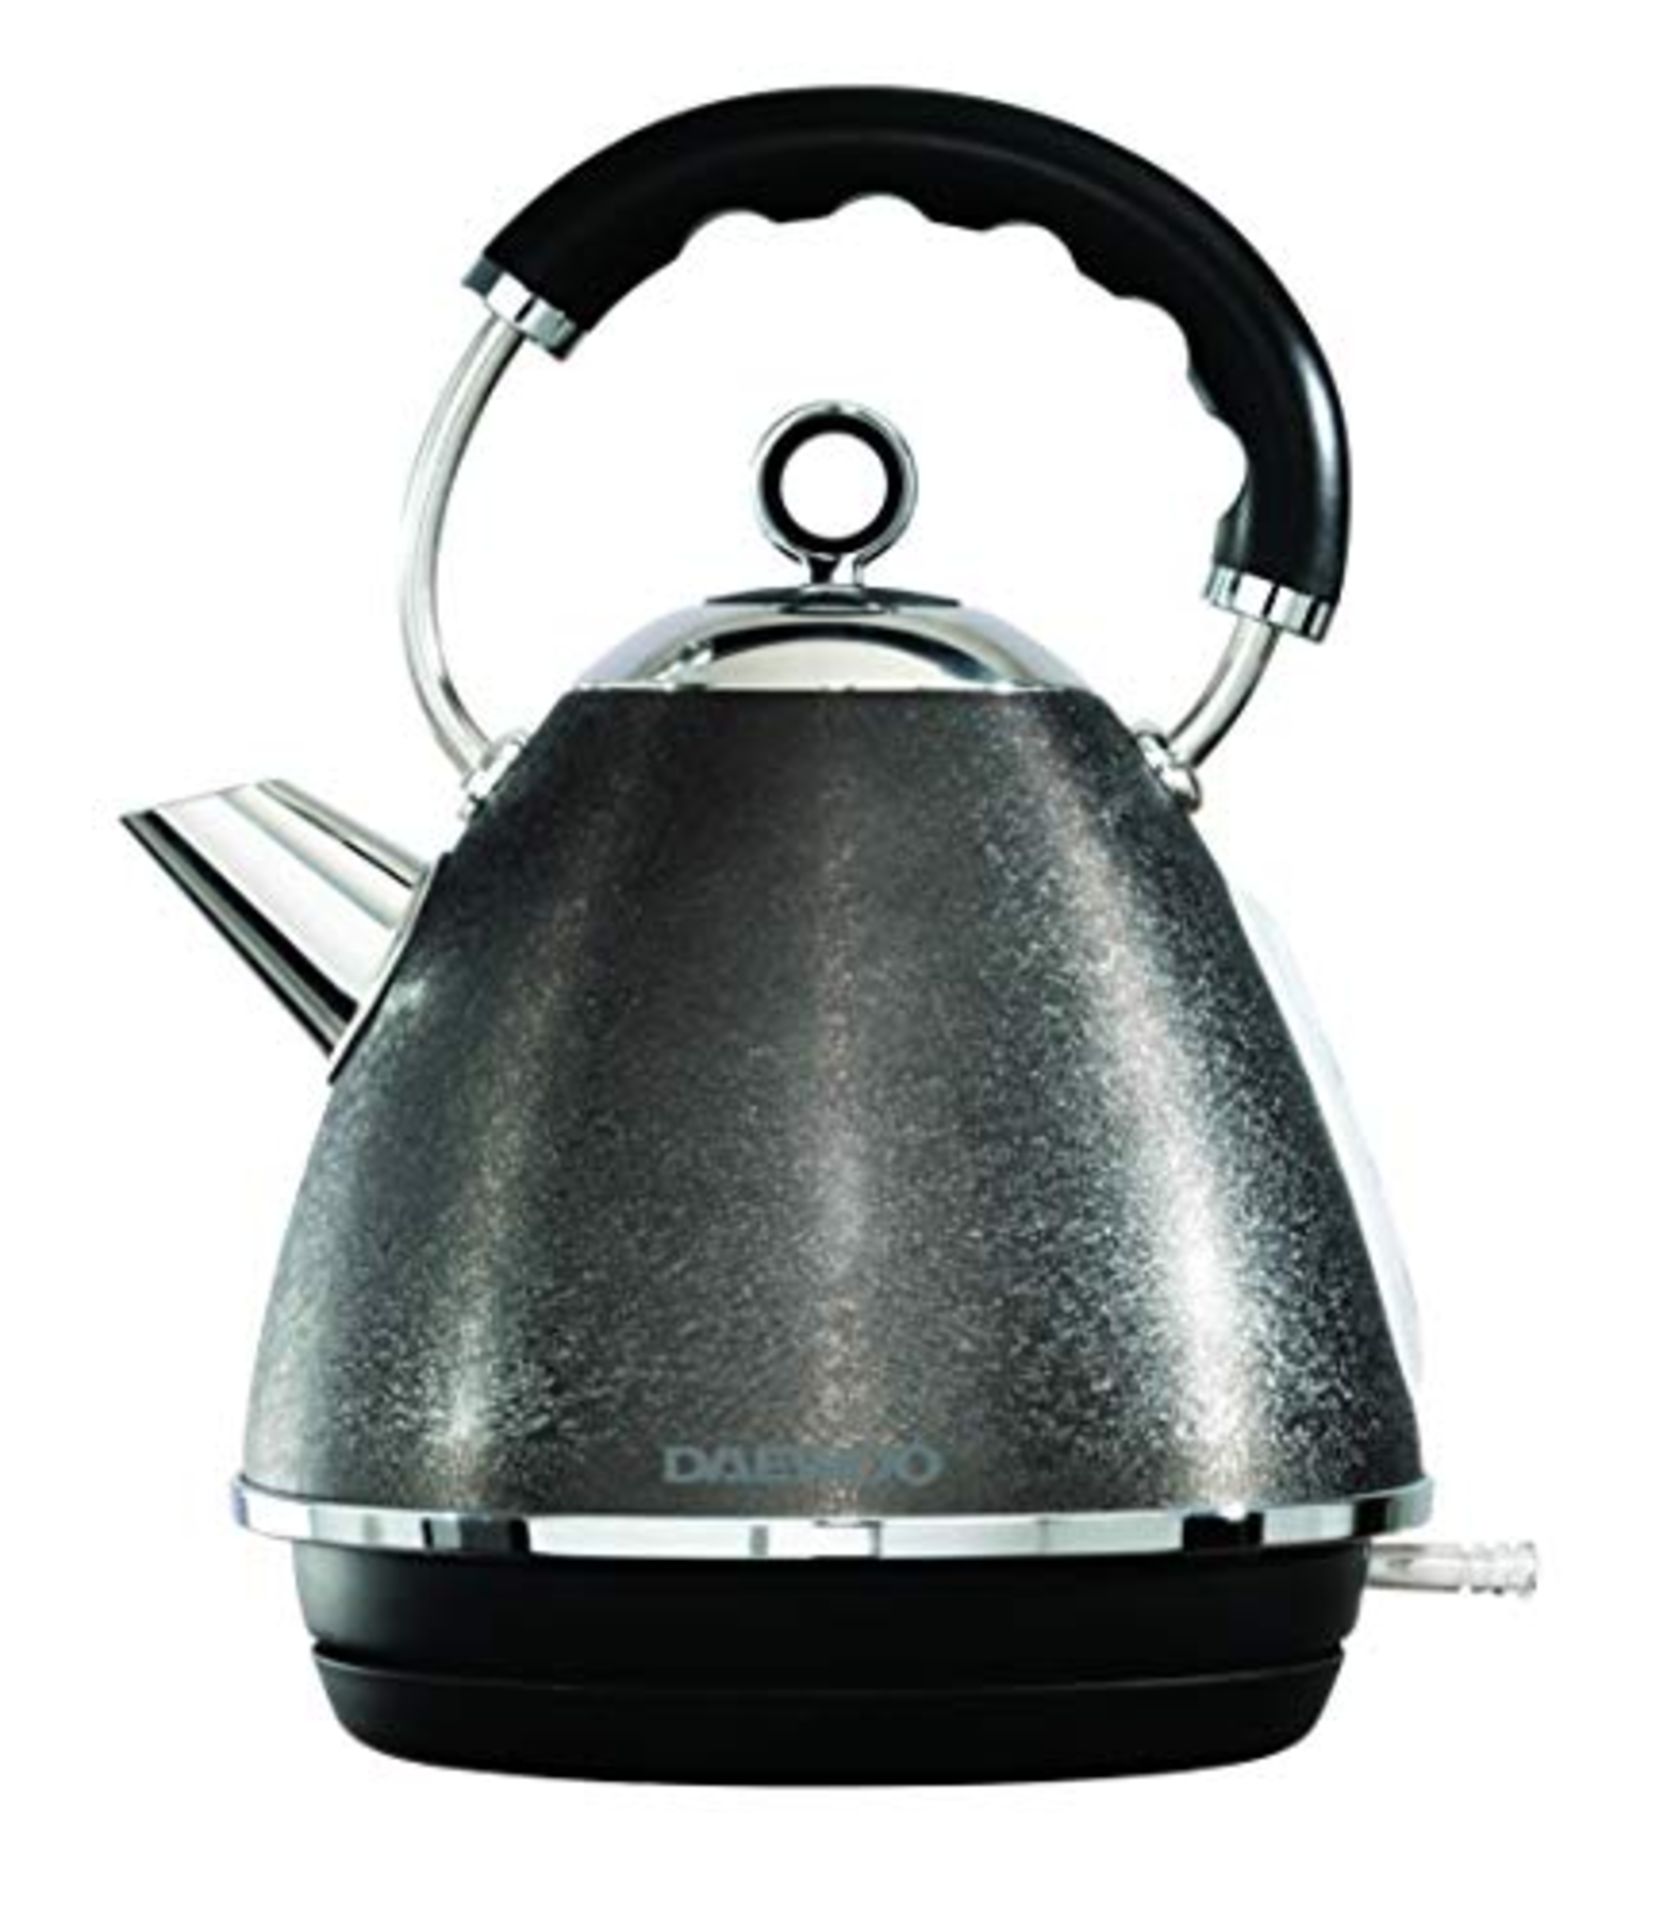 Daewoo SDA2052 Glace Noir 1.7L Pyramid Sparkling Kettle, Removable & Washable Limescale Filter, N...